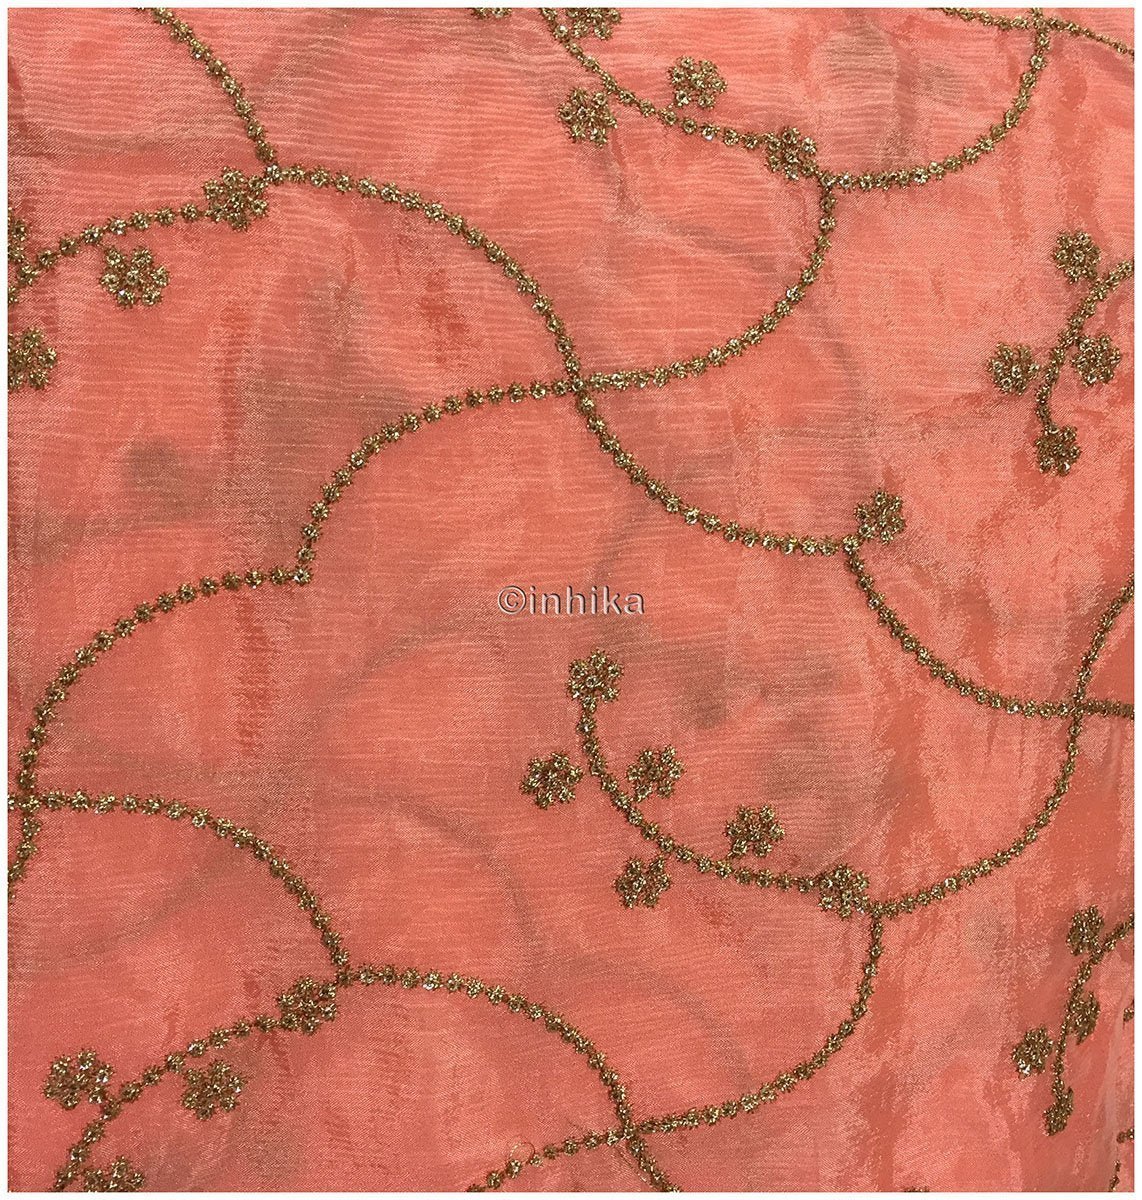 buy fabric online cheap india buy fabric material online india Embroidery Chiffon Peach, Gold 42 inches Wide 9197